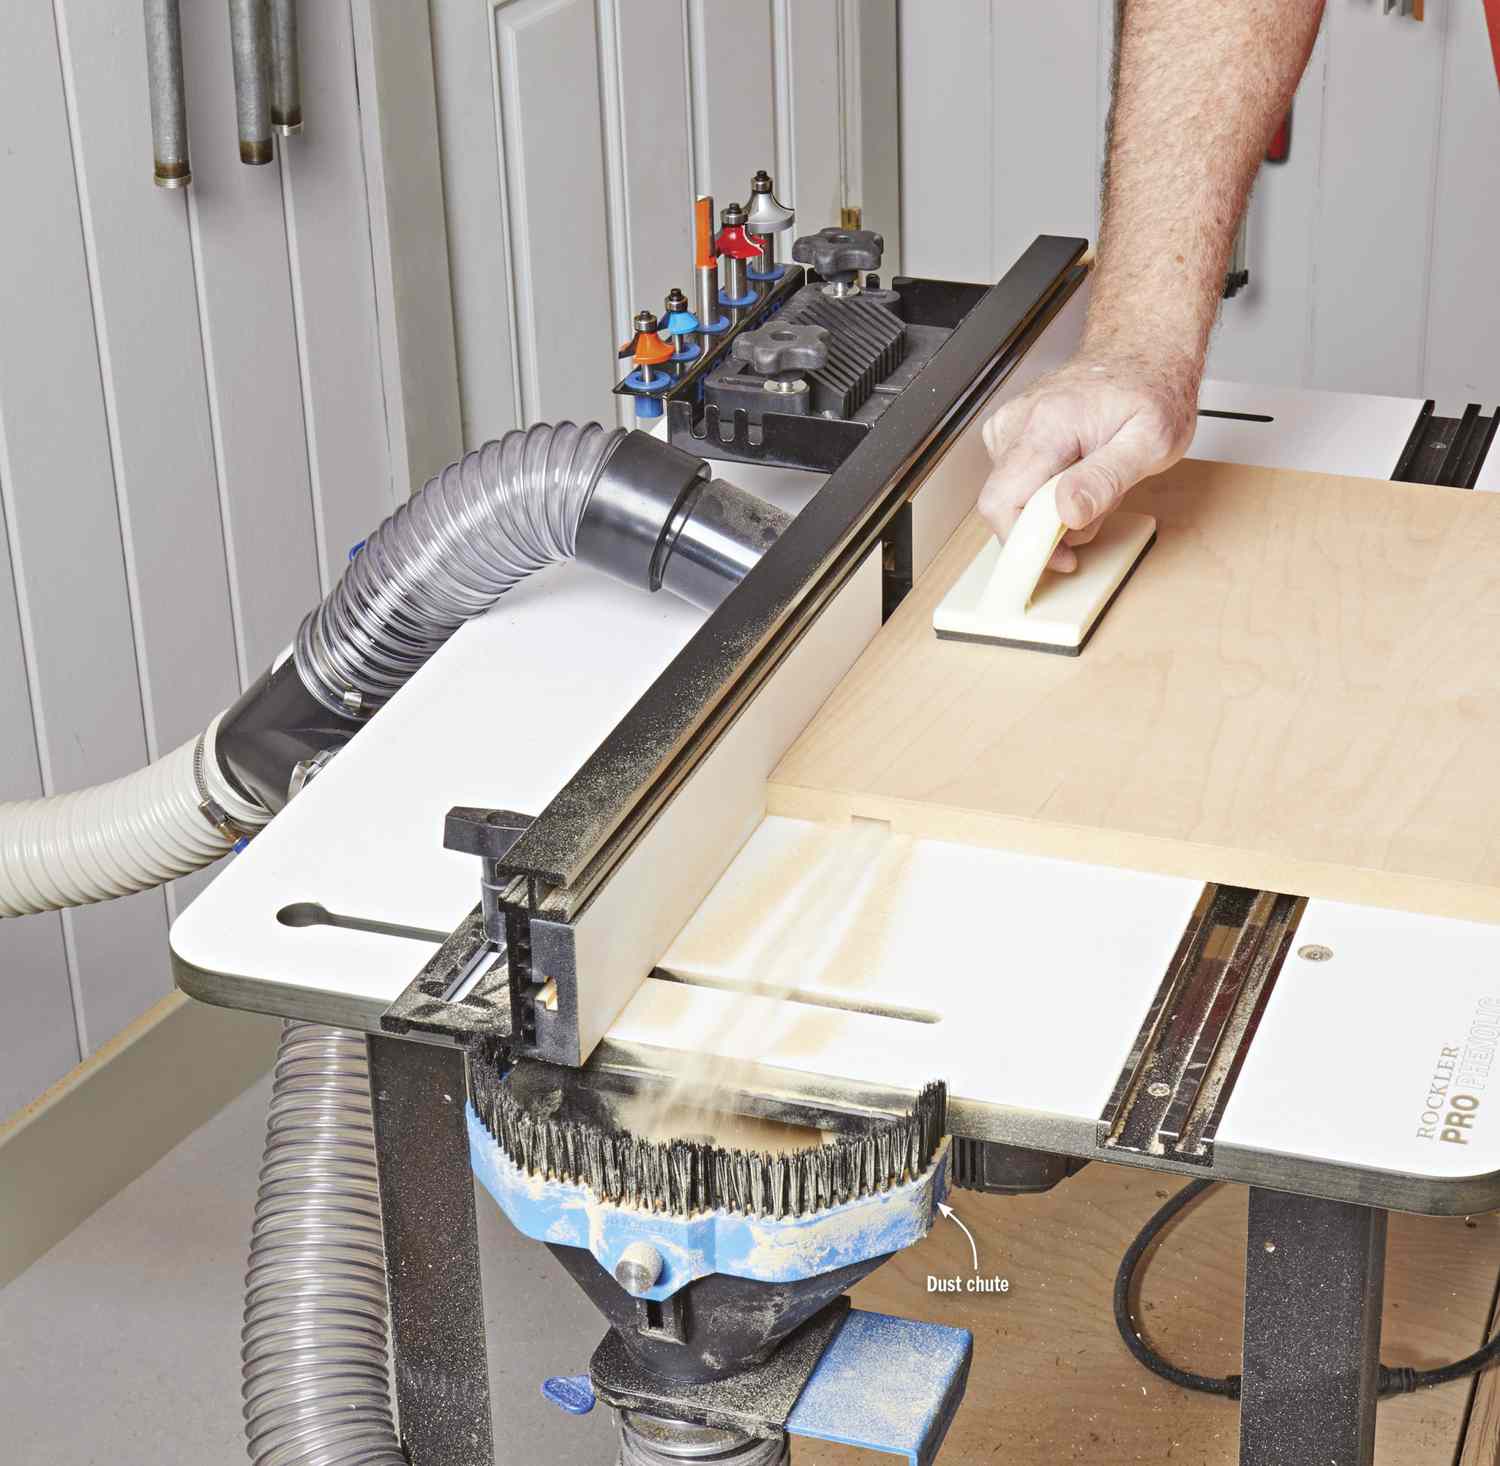 P{photo of router table in use